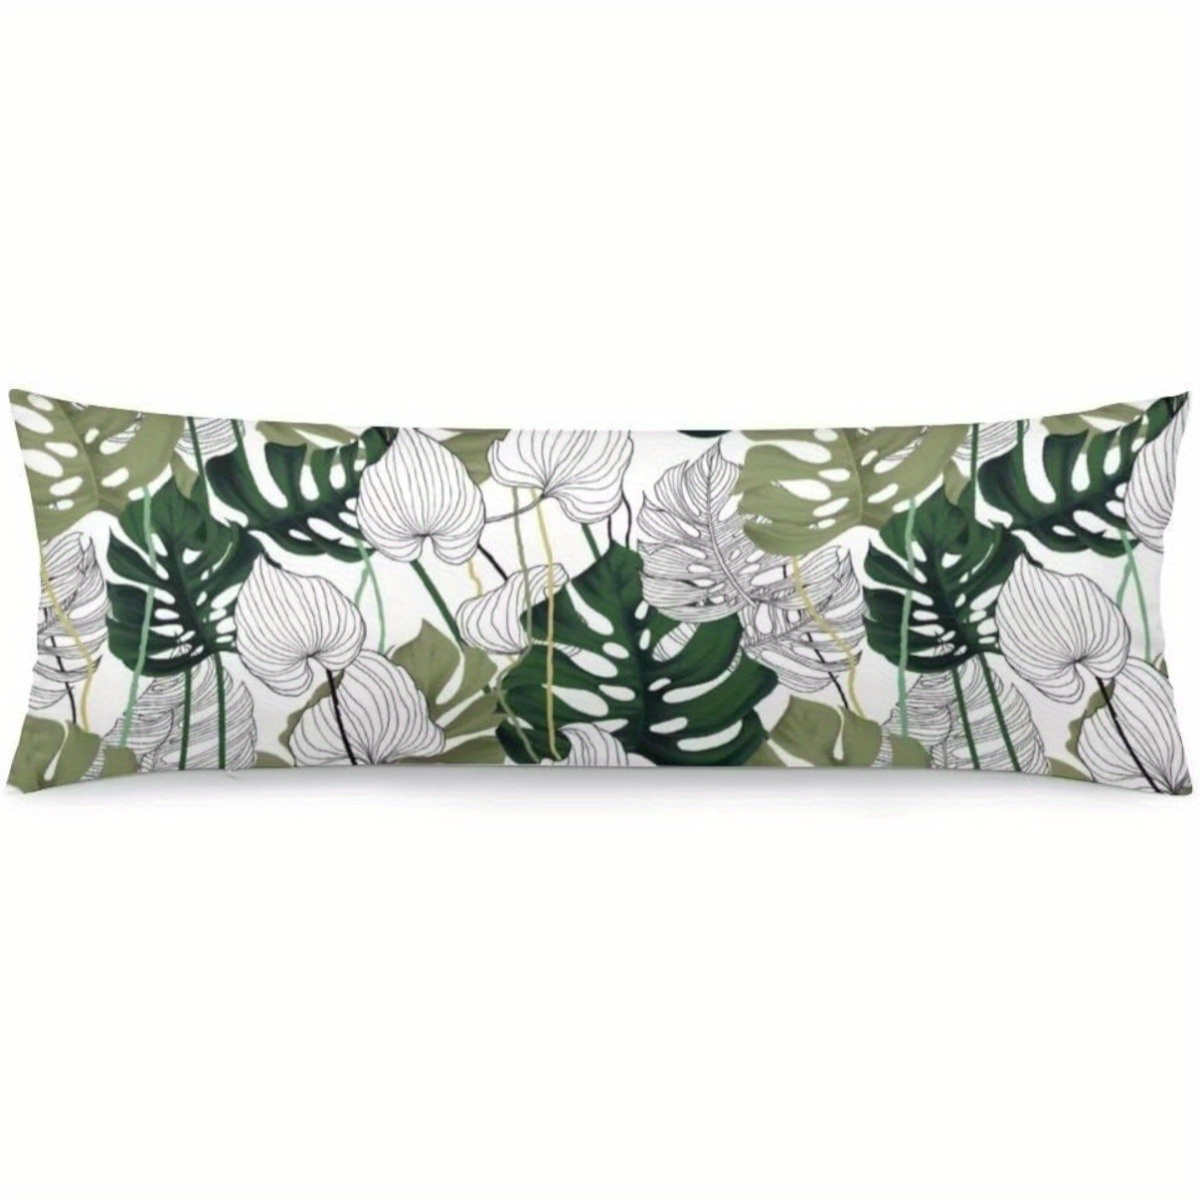 

1pc, Tropical Palm Leaf Body Pillow Cover, Retro Style, Green Botanical Throw Pillow Case With Zipper, Soft Decorative Bedding Cushion Cover, 20x54 Inches, For Home & Bedroom Decor